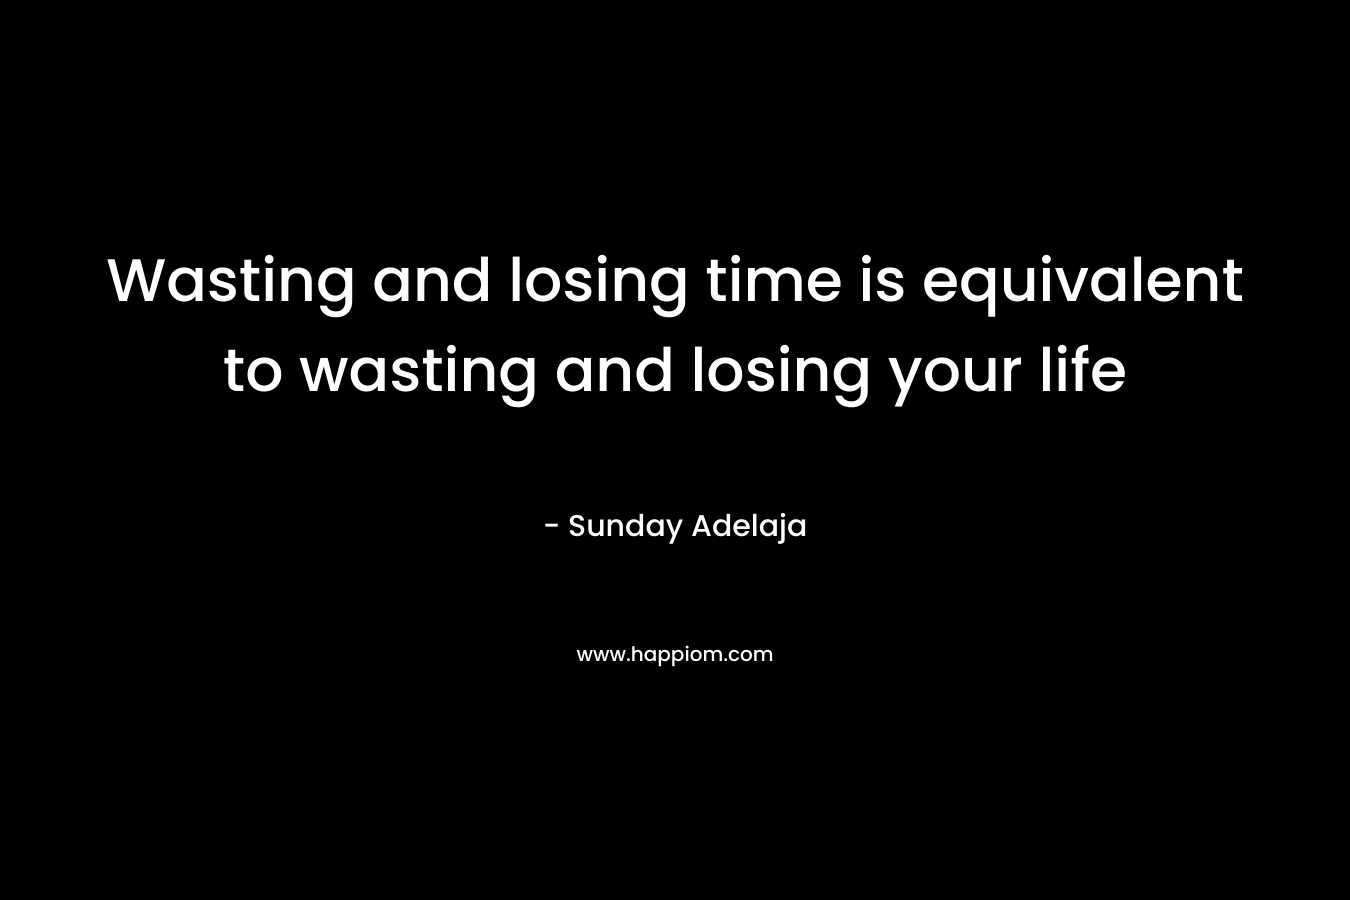 Wasting and losing time is equivalent to wasting and losing your life